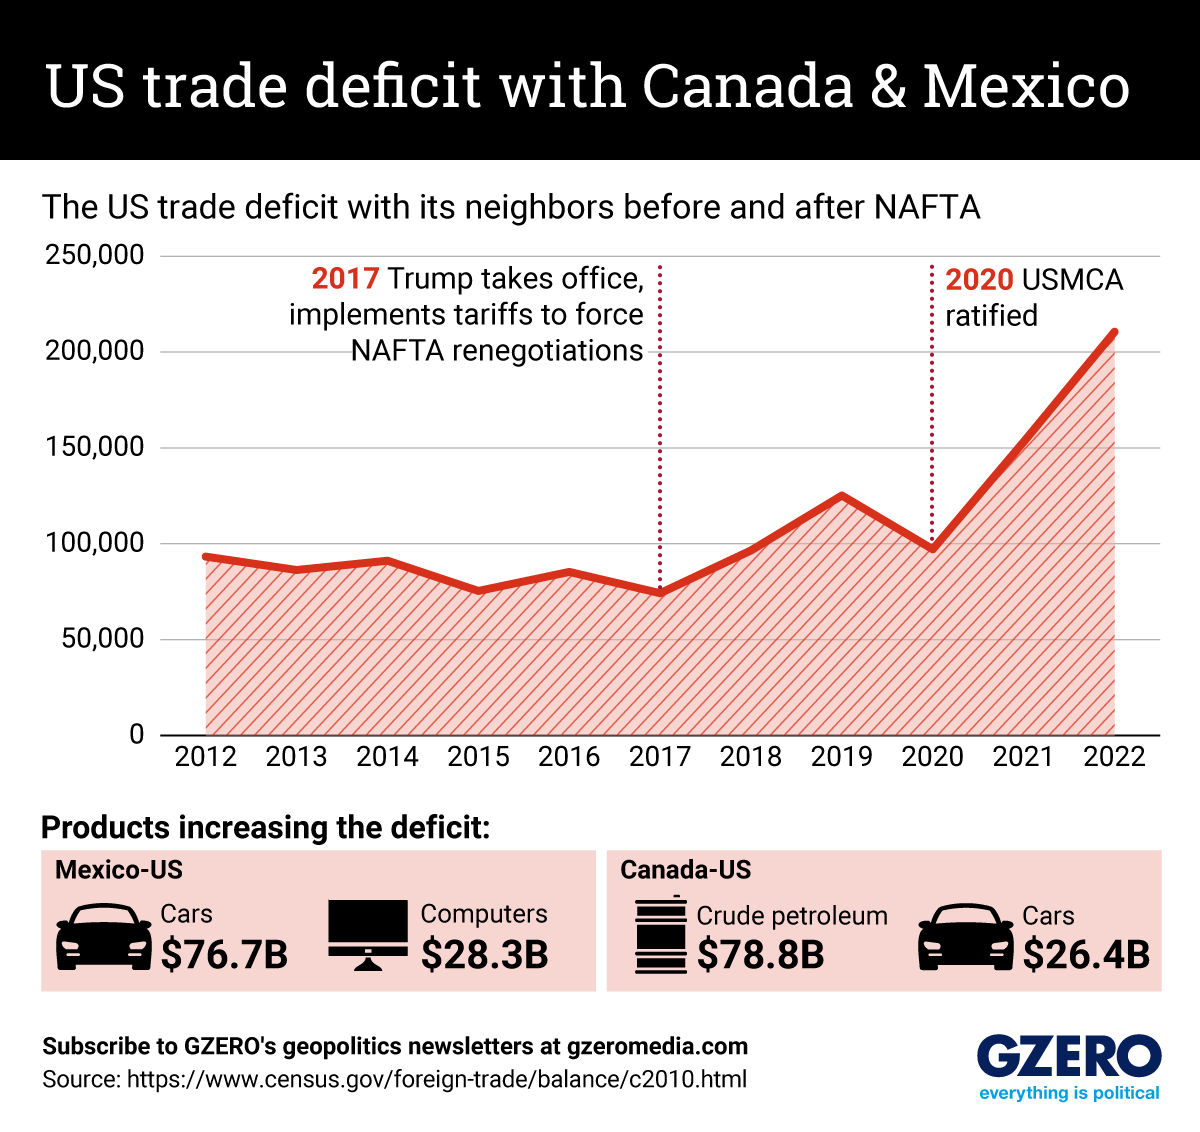 Line chart of US trade deficit with Canada & Mexico after NAFTA